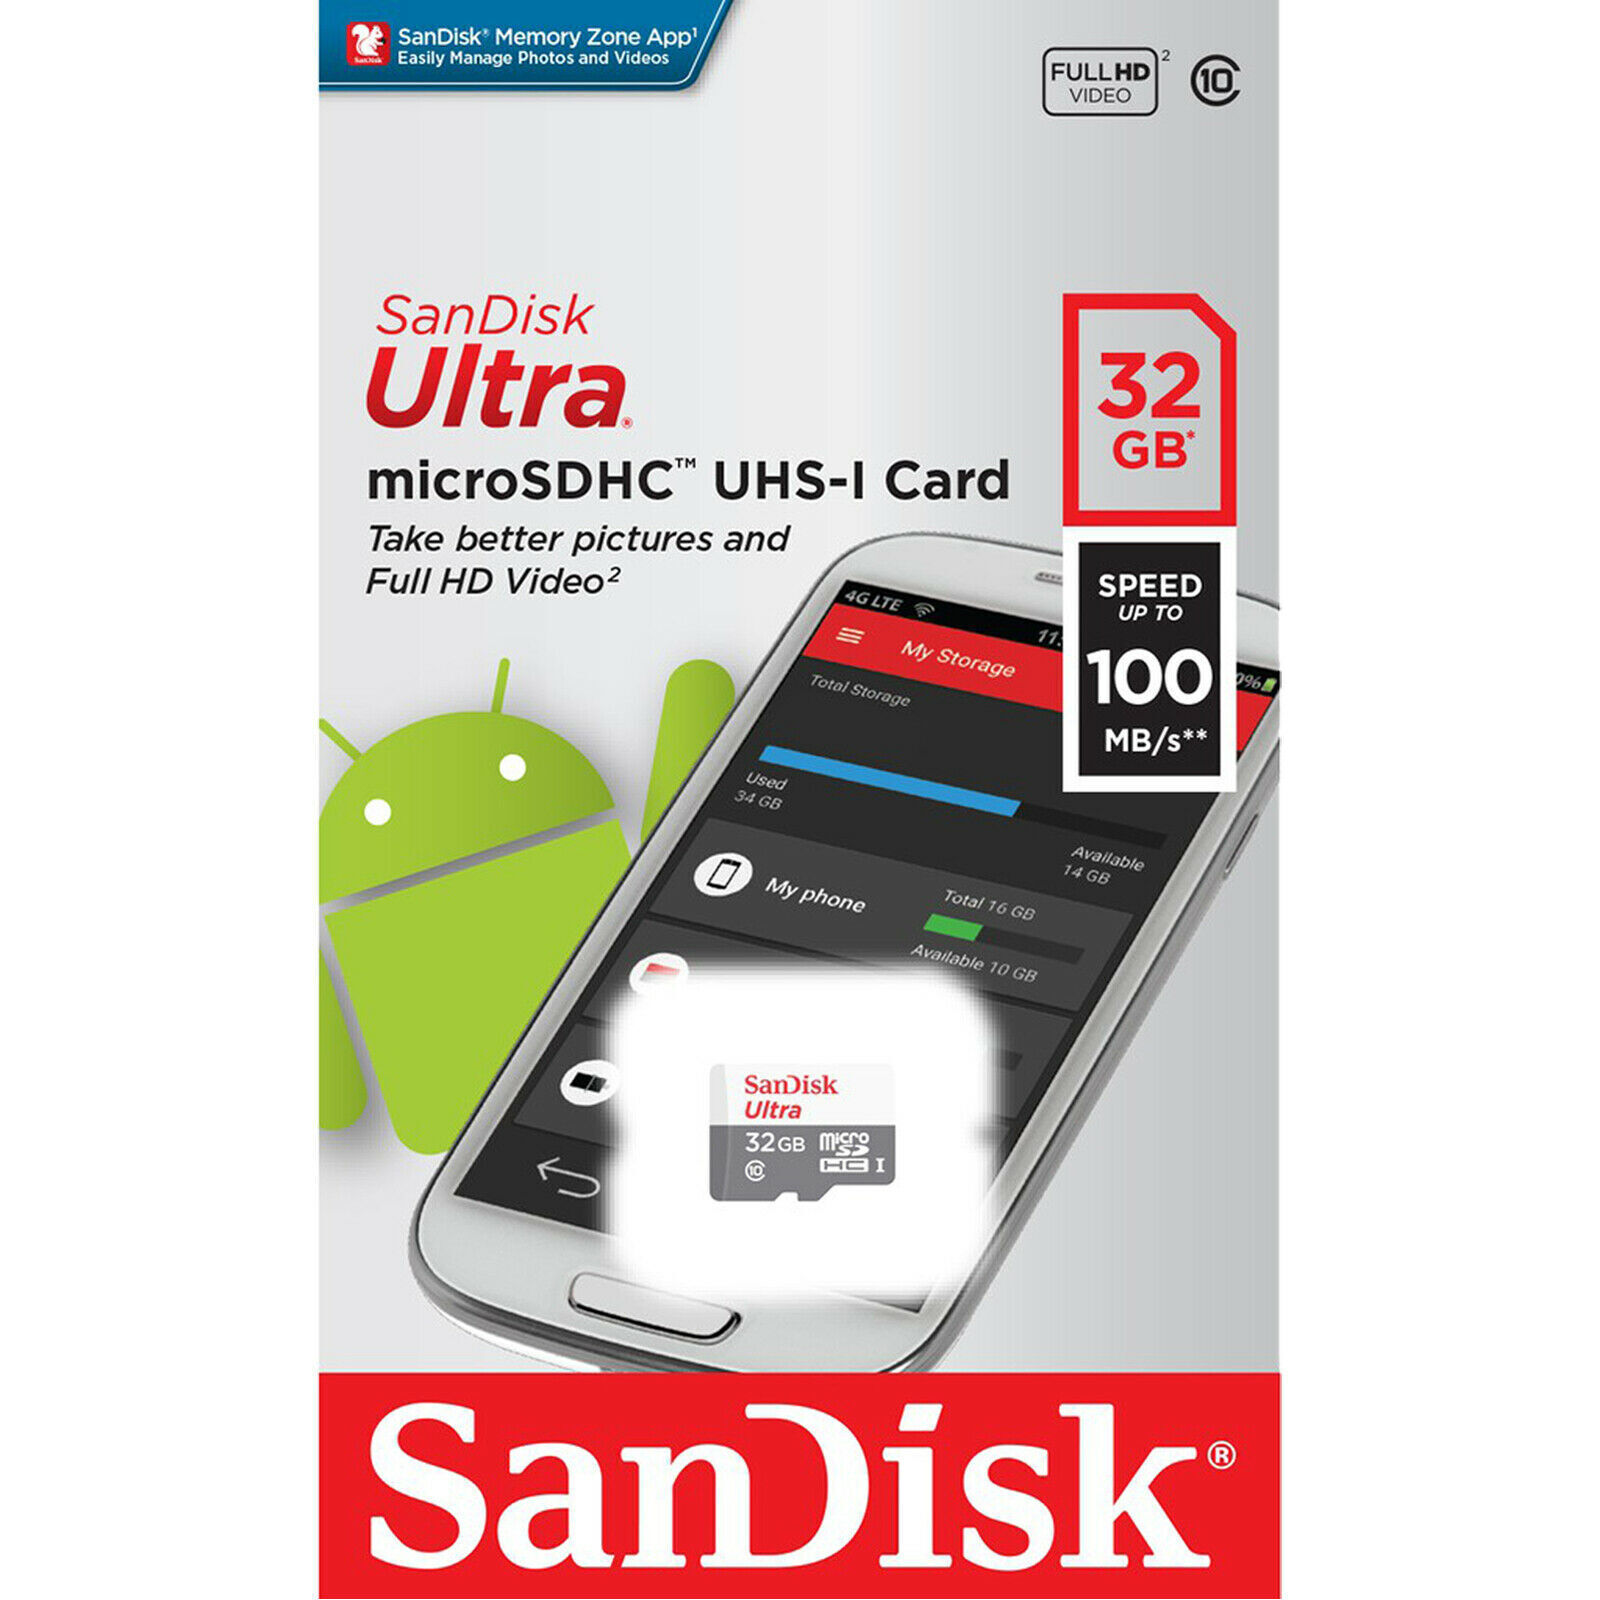 SanDisk Ultra Micro SD Card microSDHC UHS-I Full HD 100MB/s Mobile Phone Tablet TF Memory Card 32GB